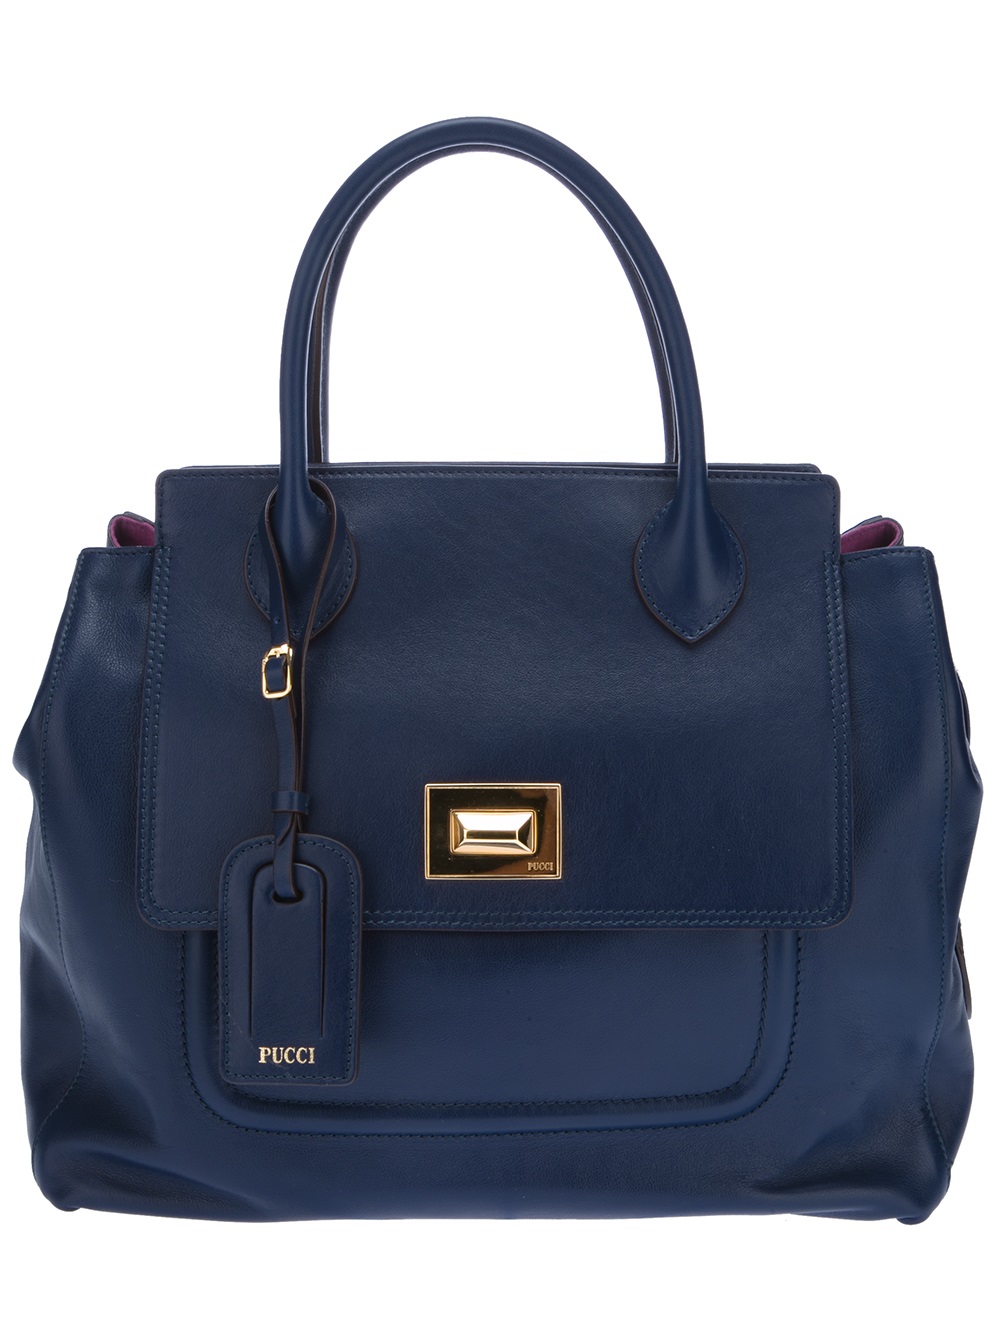 Emilio Pucci Tote Bag in Blue (navy) | Lyst